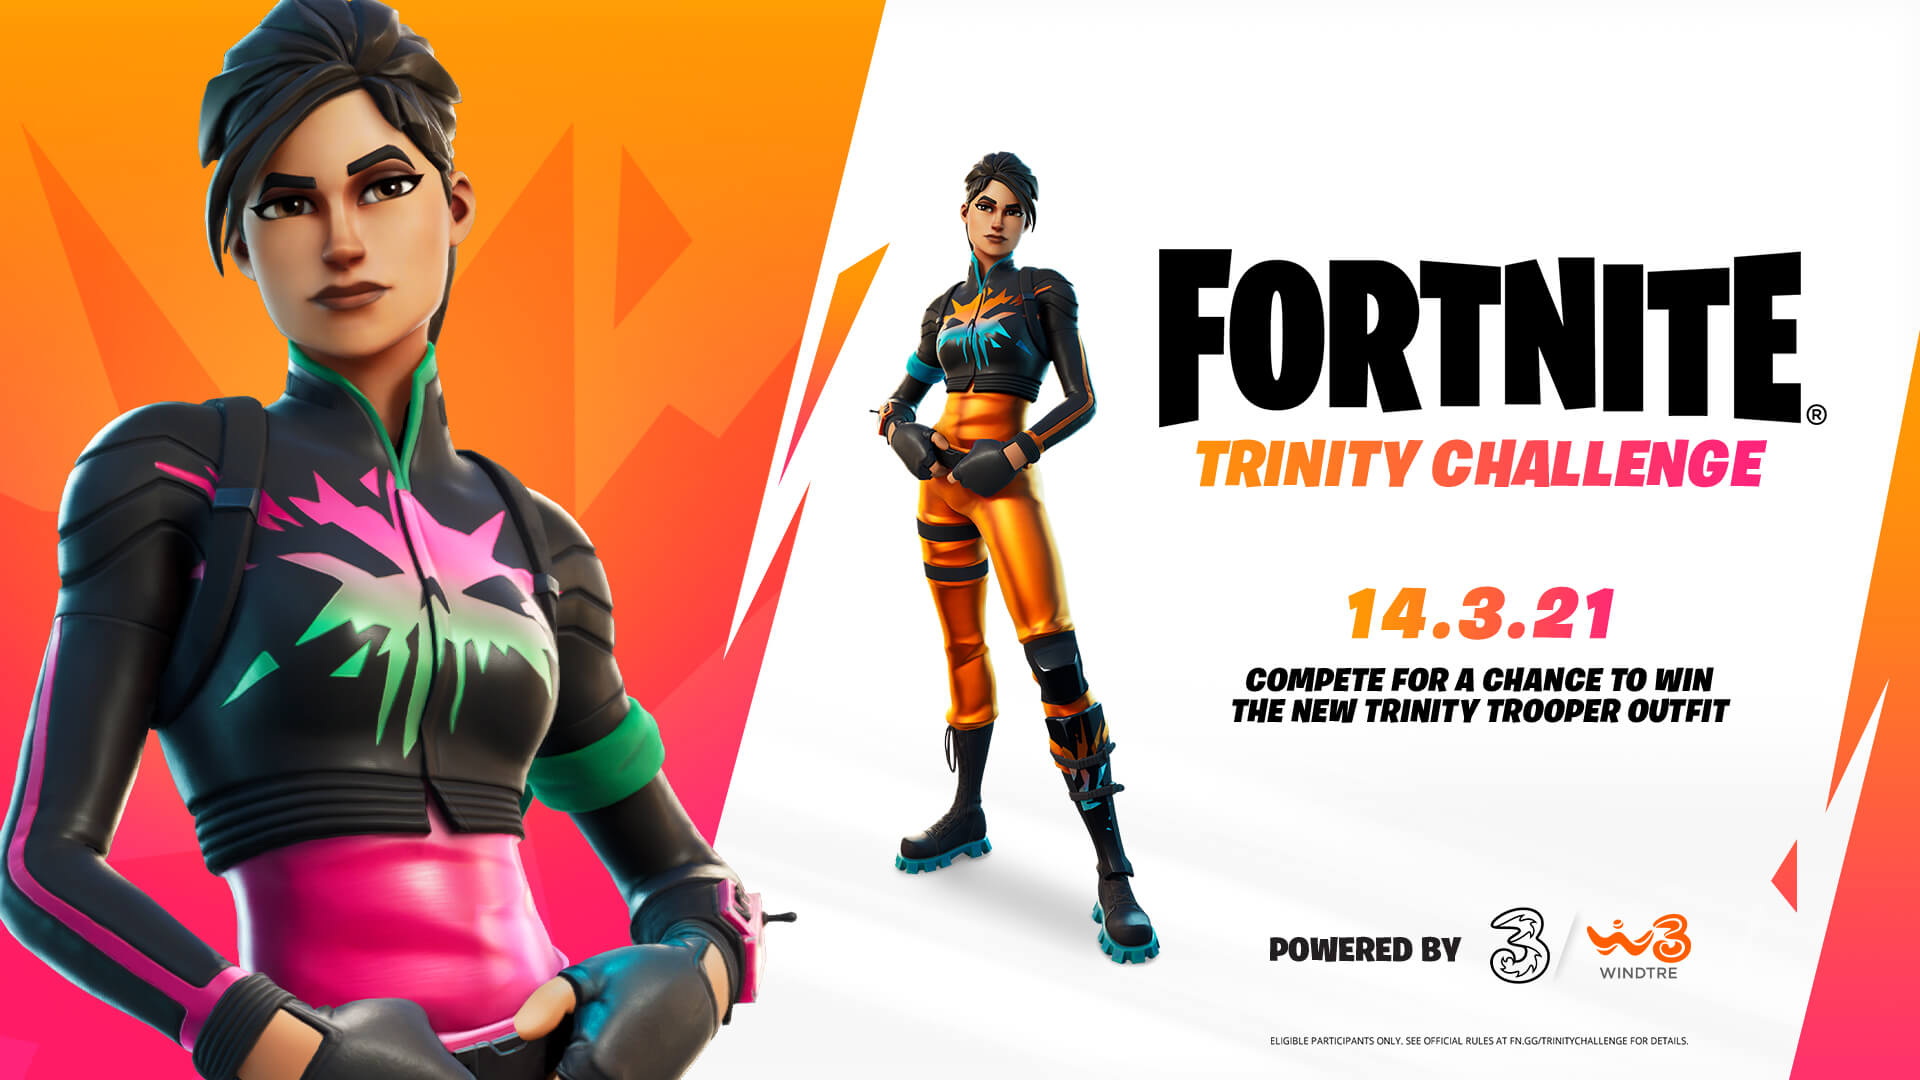 The Fortnite Trinity Challenge takes place March 14, presented by Three